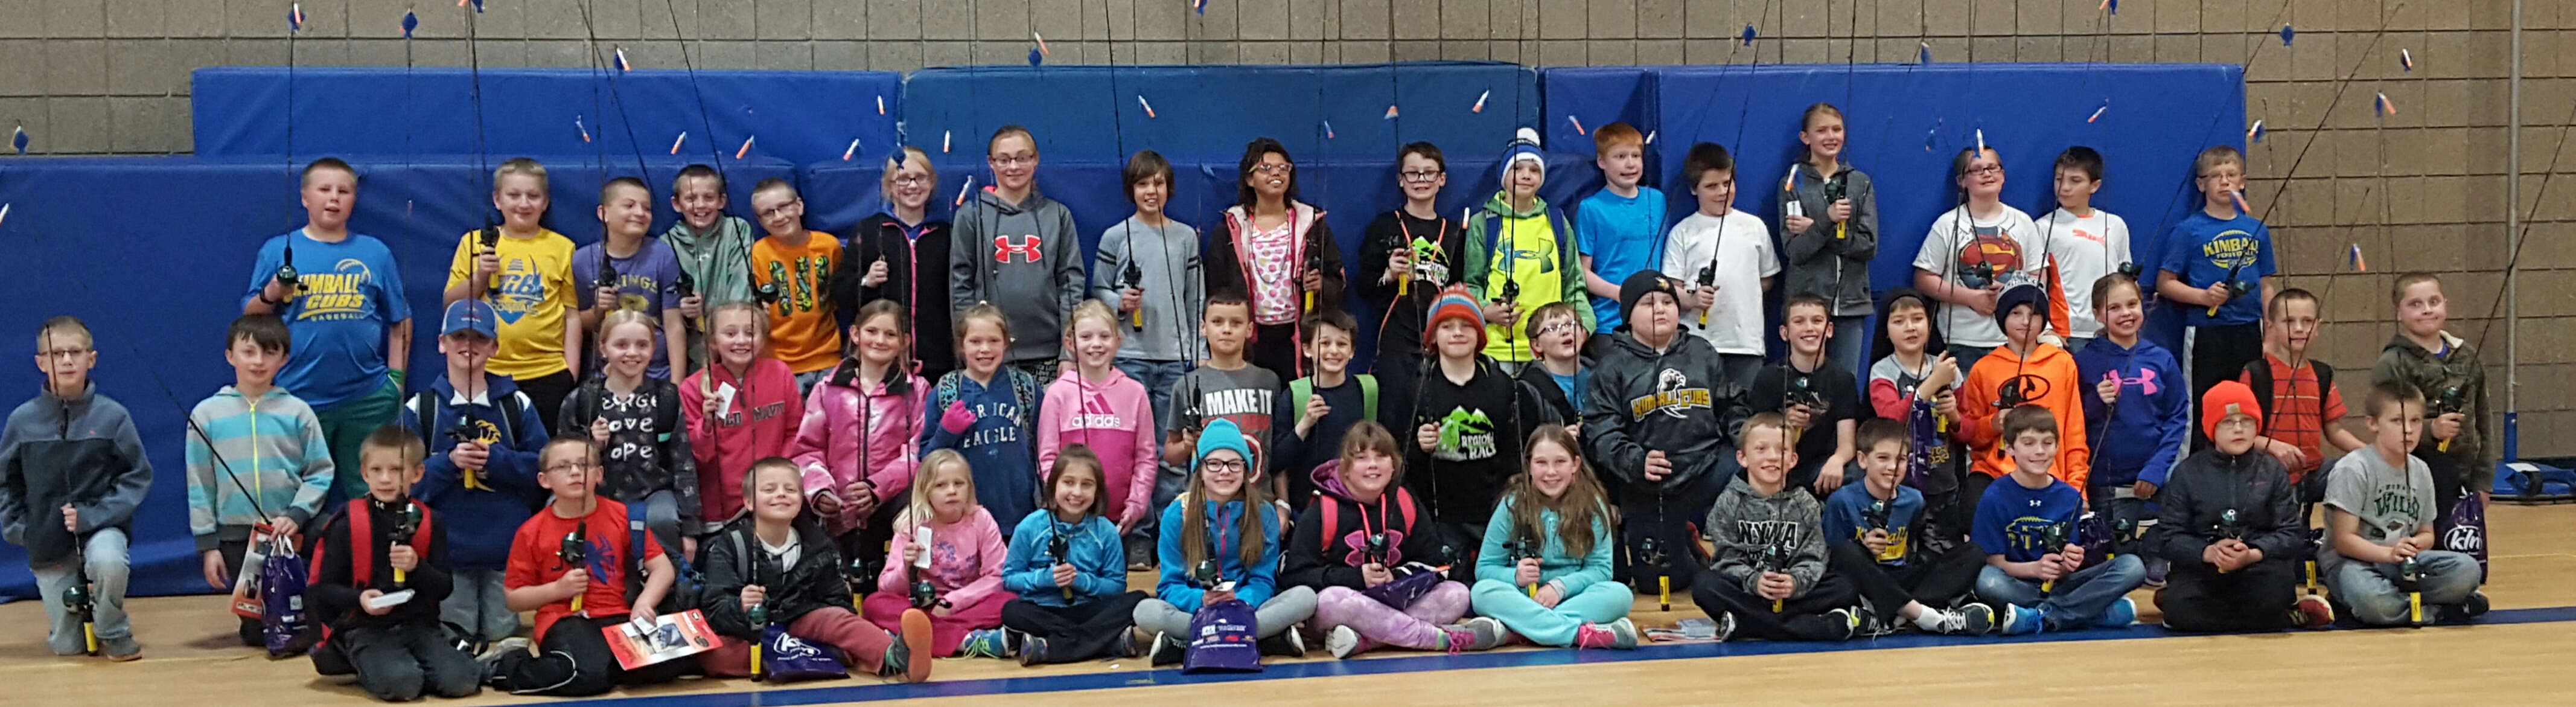 School of Fish, the leaders in fishing education, recently completed their fourth year of hosting fishing classes for kids and their parents and other adults across the Midwest.